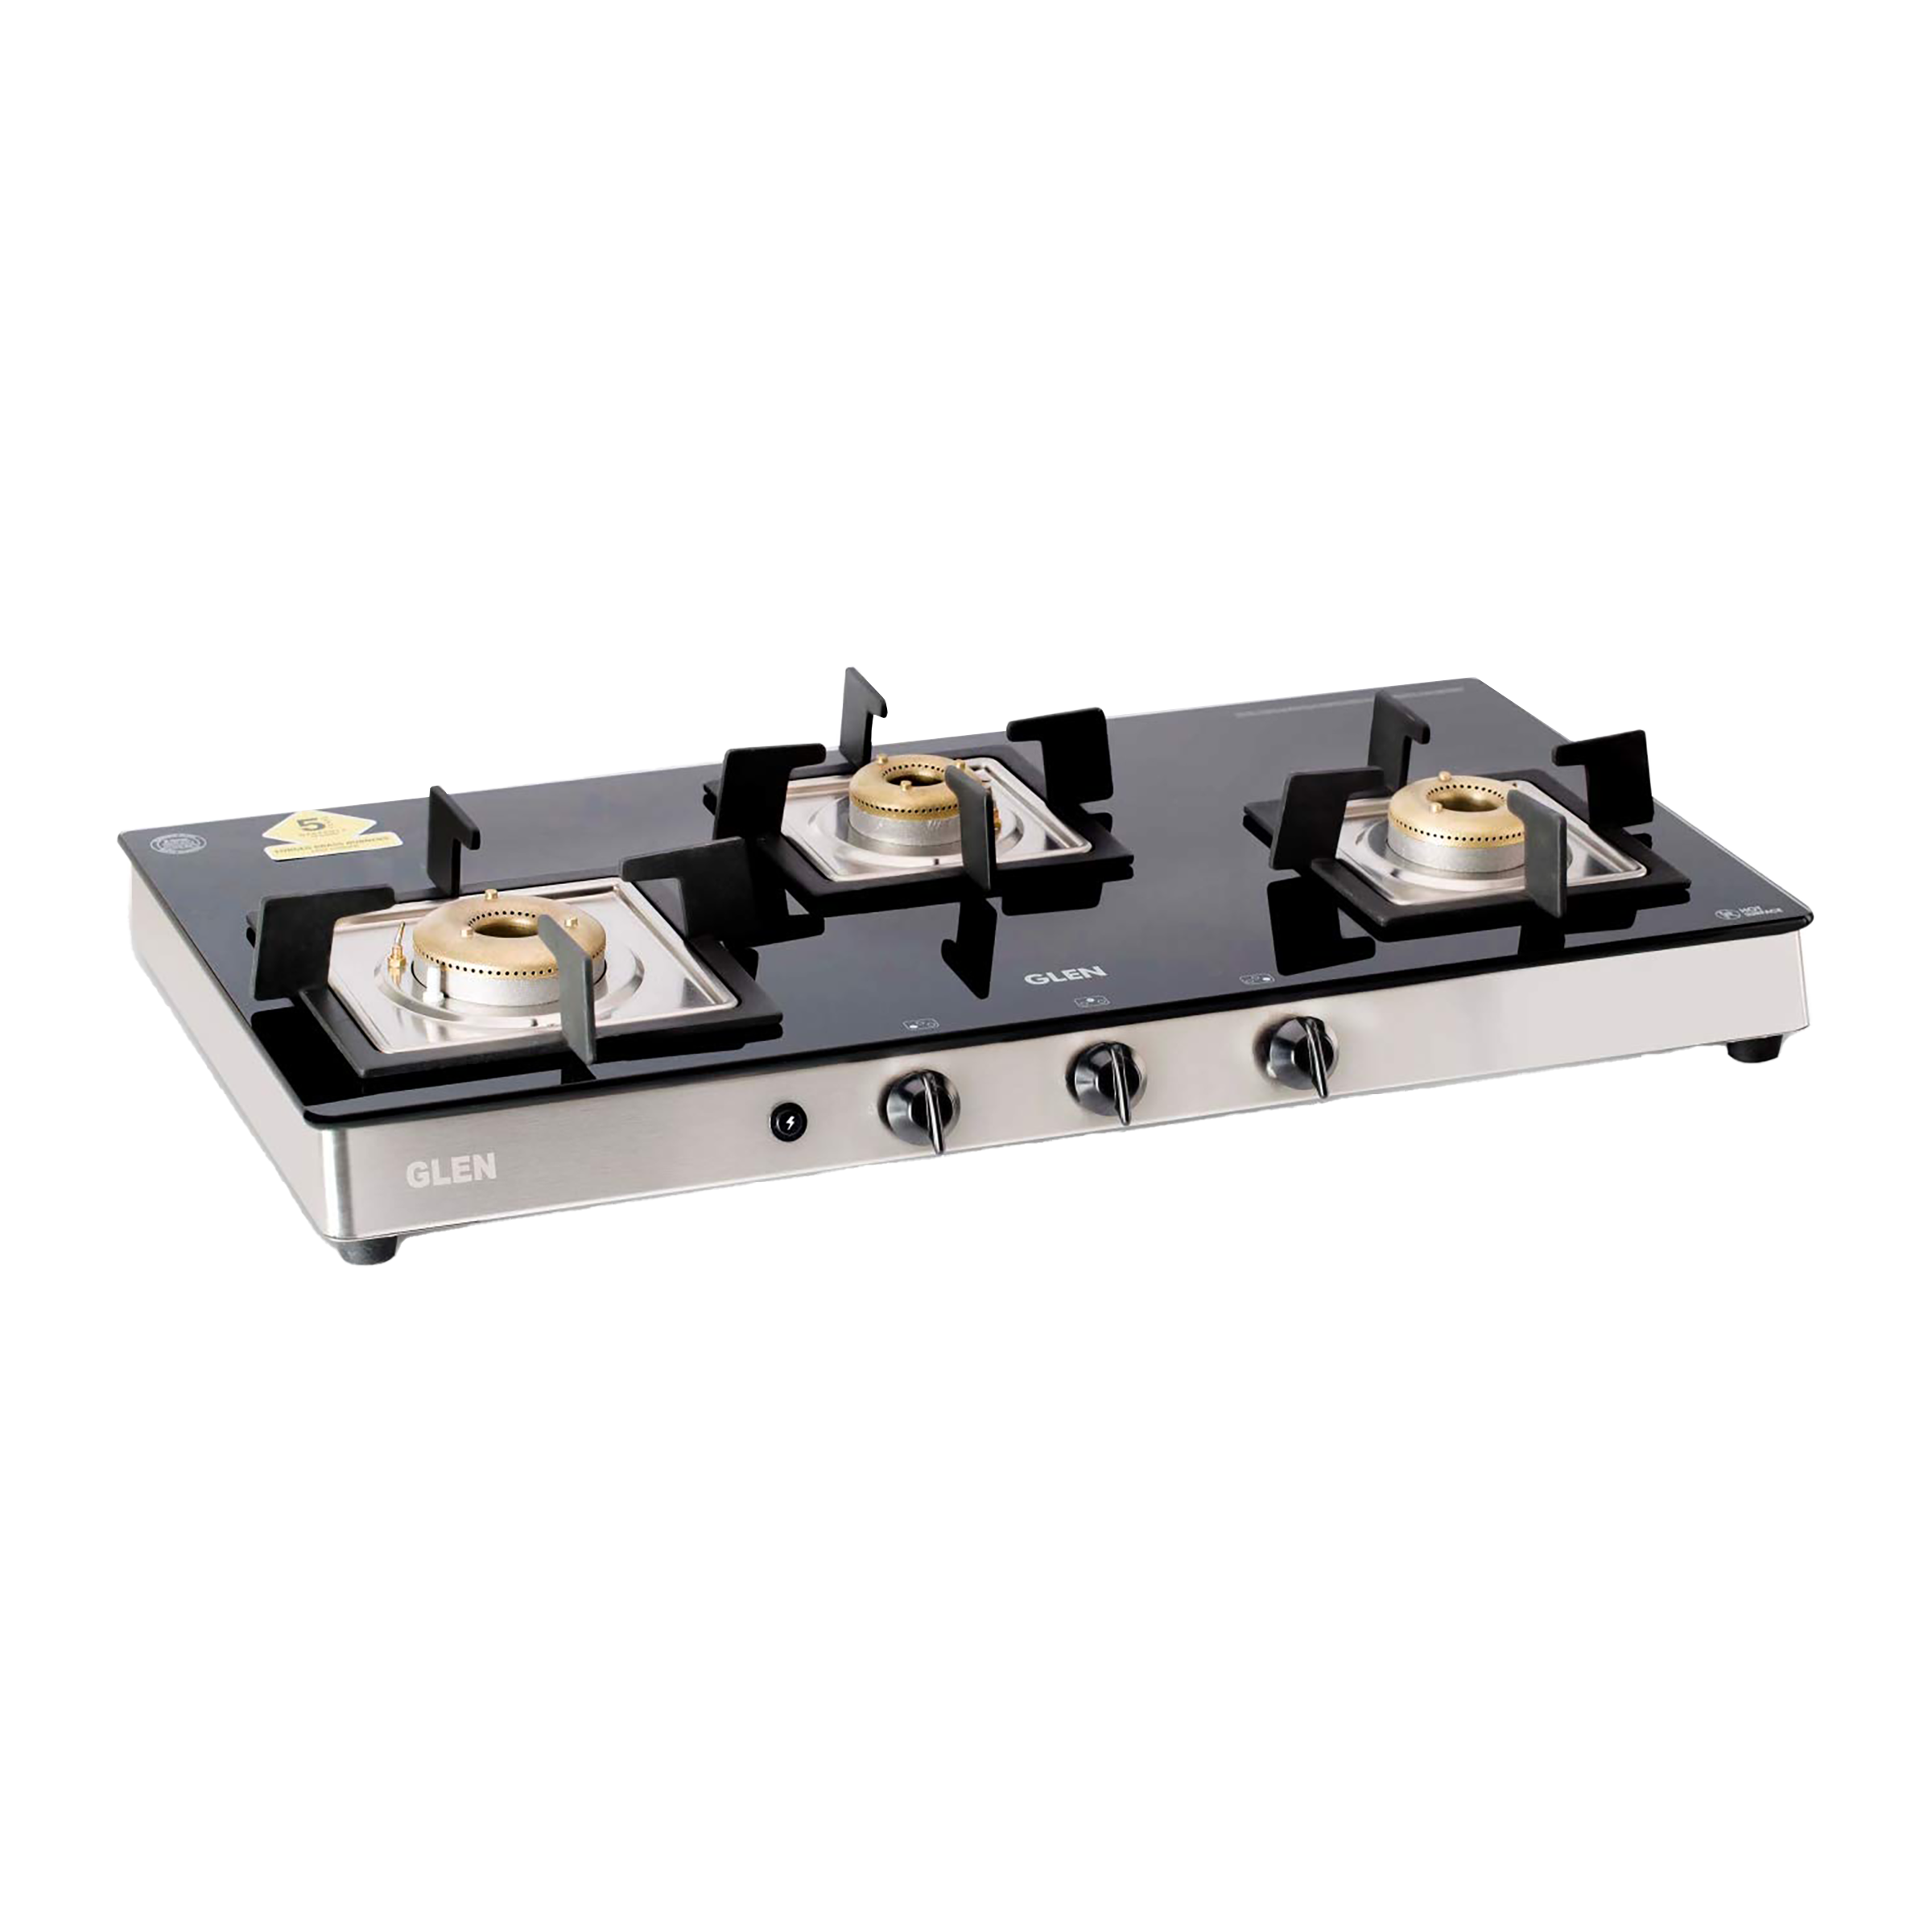 Glen 1038 SQ GT AI Forged BB FFD 3 Burner Toughened Glass Top Gas Stove (360° Revolving Inlet Nozzle, Black)_1